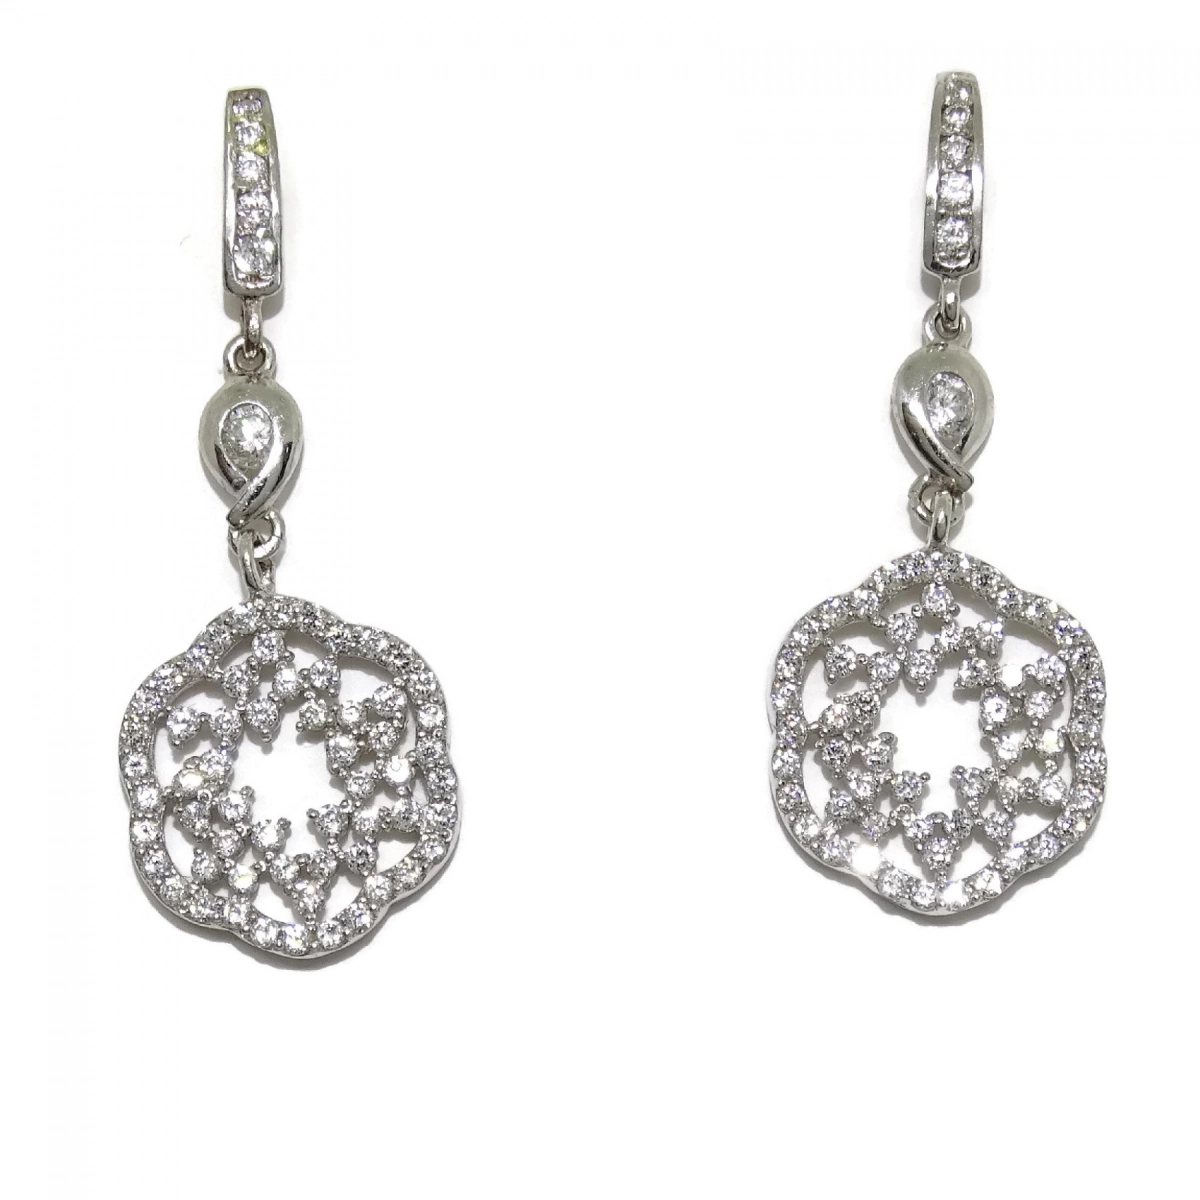 EARRINGS OF WHITE GOLD OF 18KTES WITH ZIRCONS OF THE HIGHEST QUALITY. PRESSURE. 3.00 CM LONG NEVER SAY NEVER